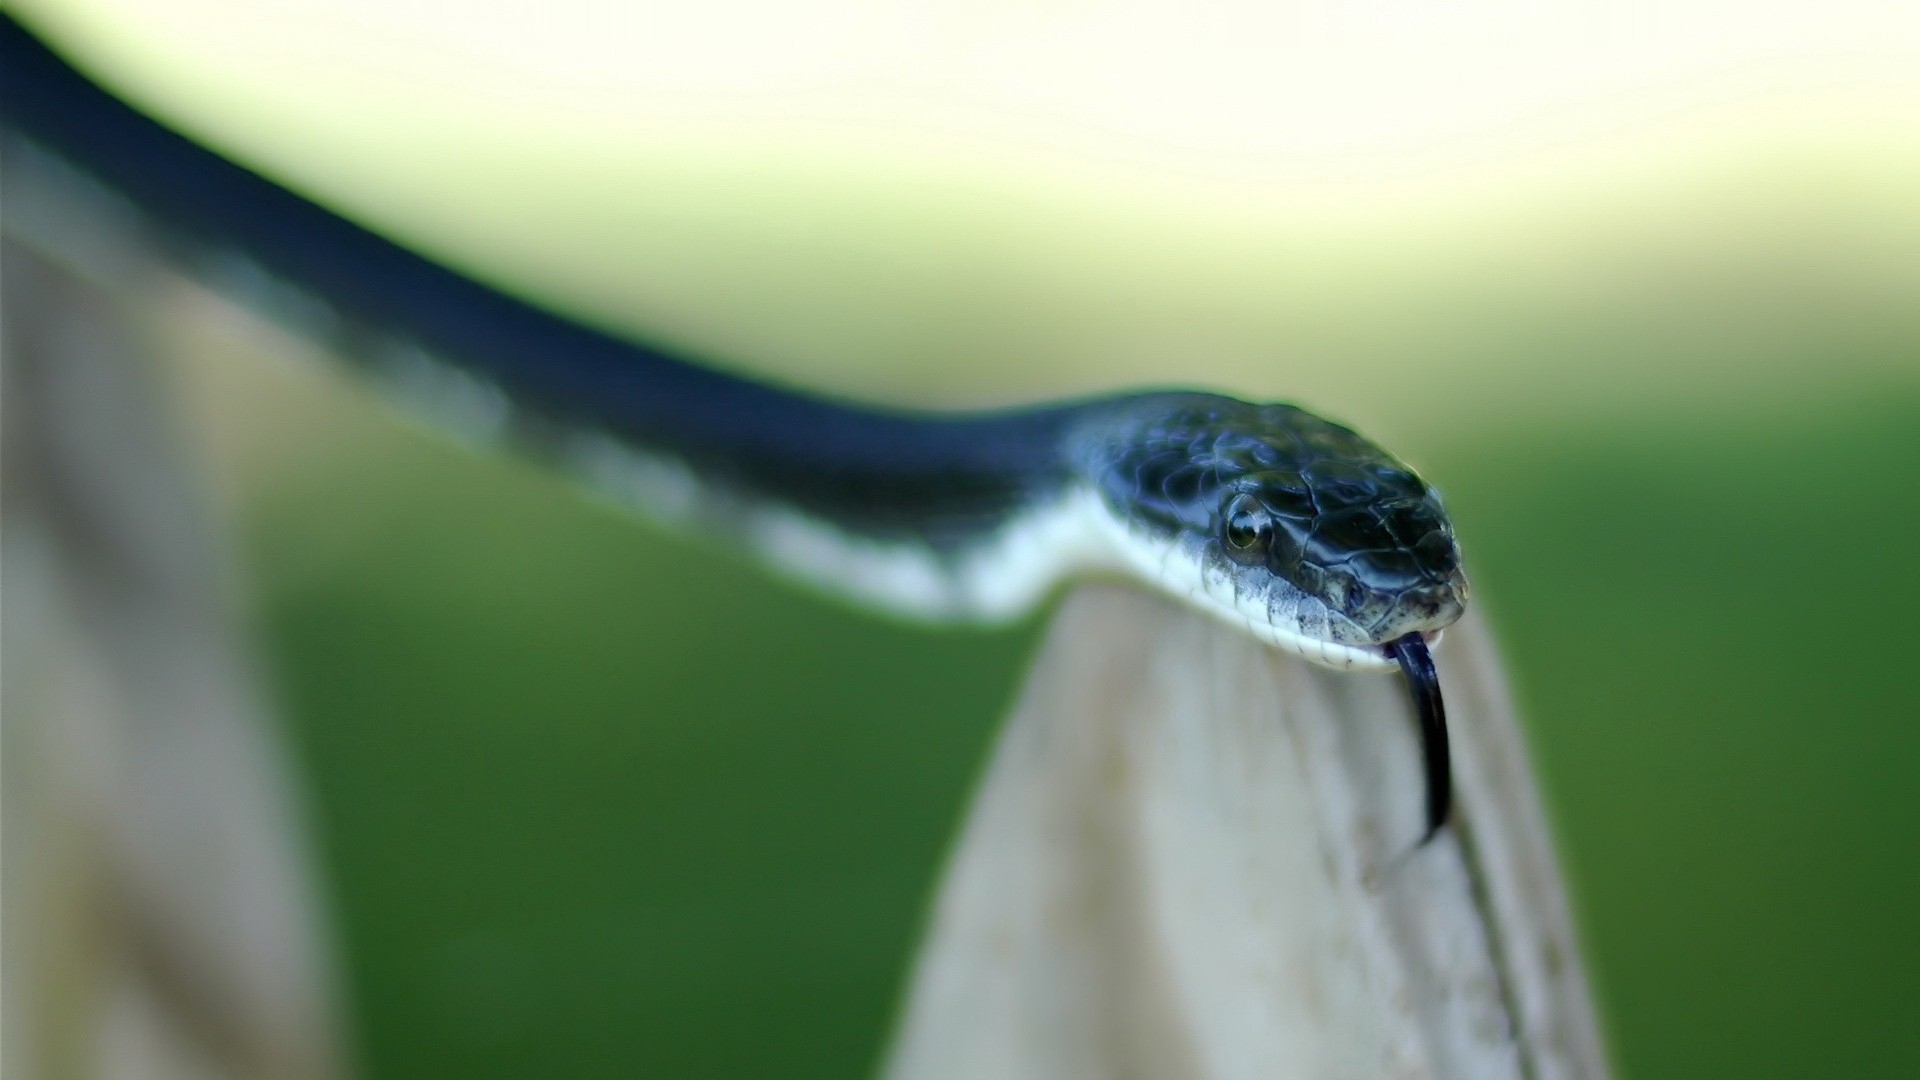 General 1920x1080 snake animals reptiles depth of field macro green background